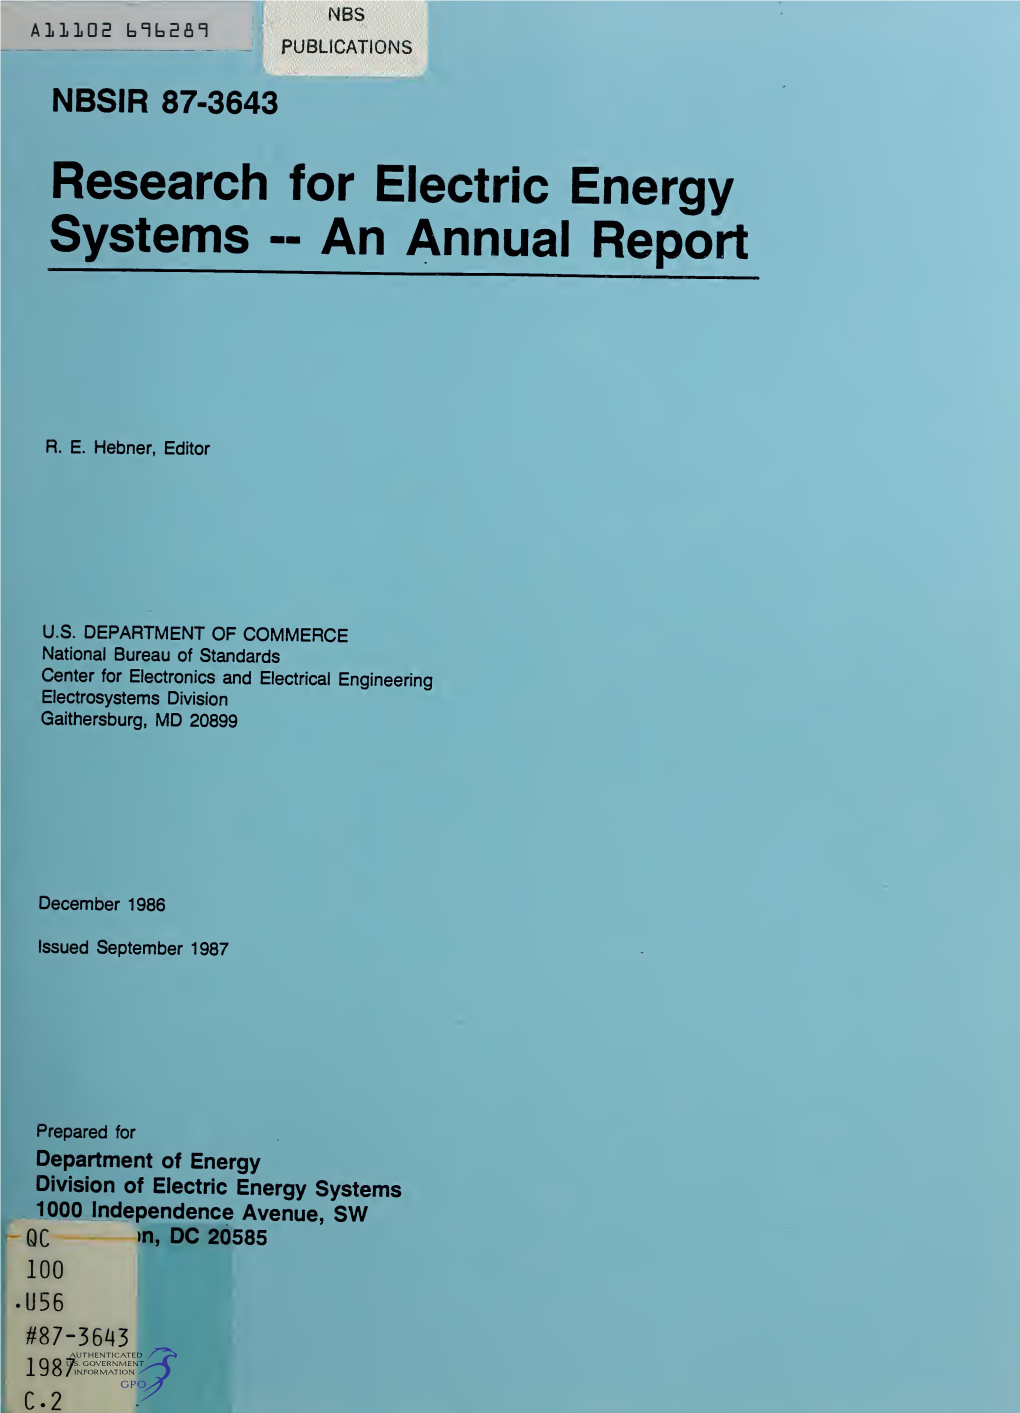 Research for Electric Energy Systems -- an Annual Report